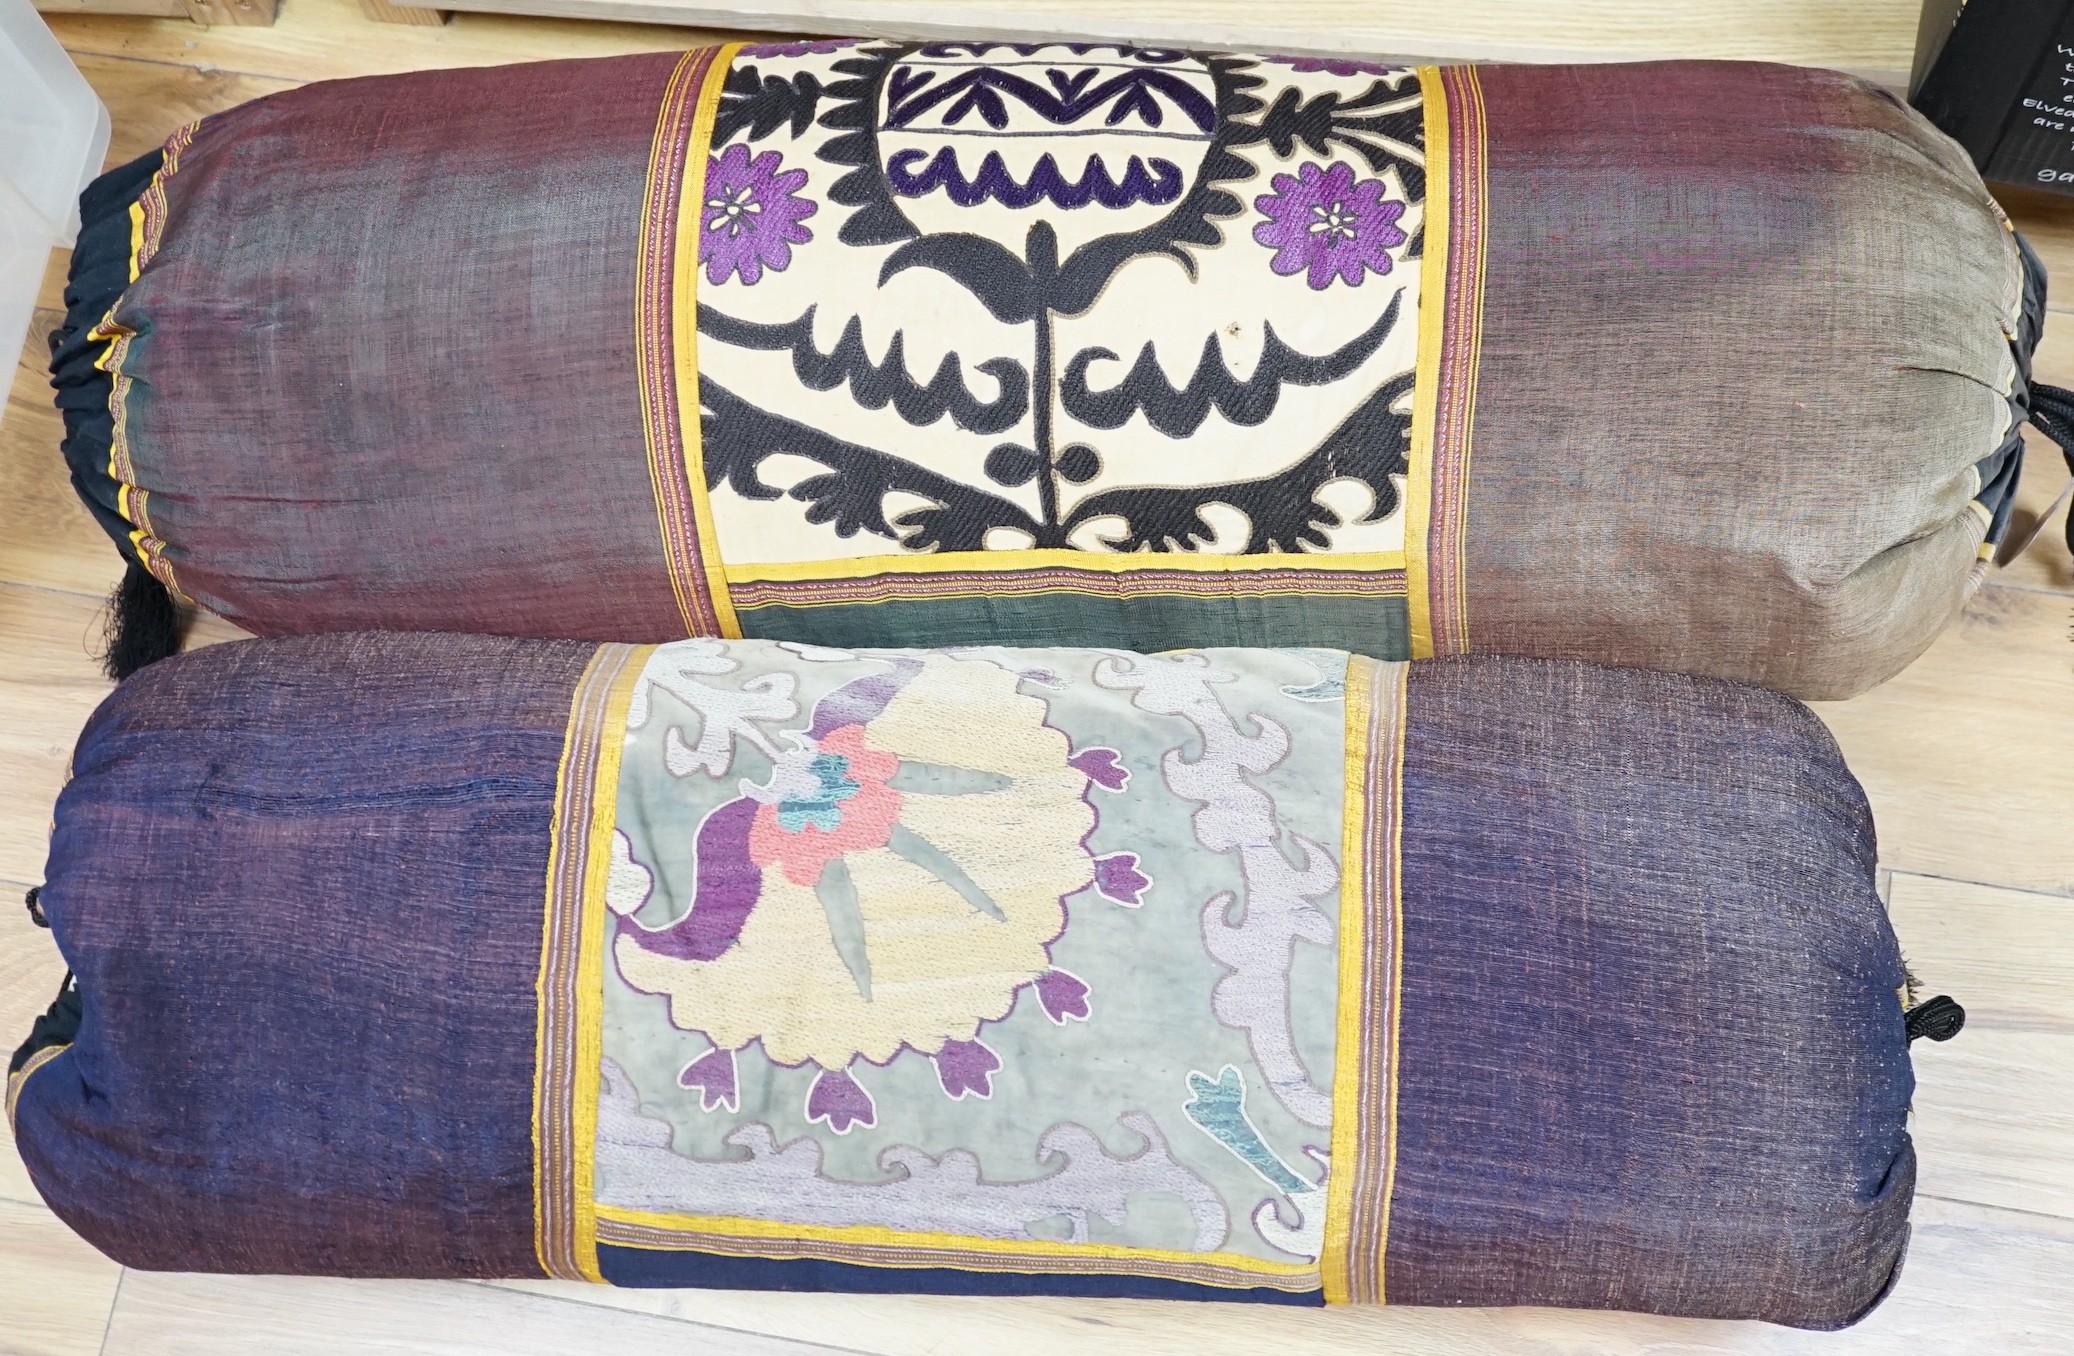 Two Islamic embroidered pillow cases